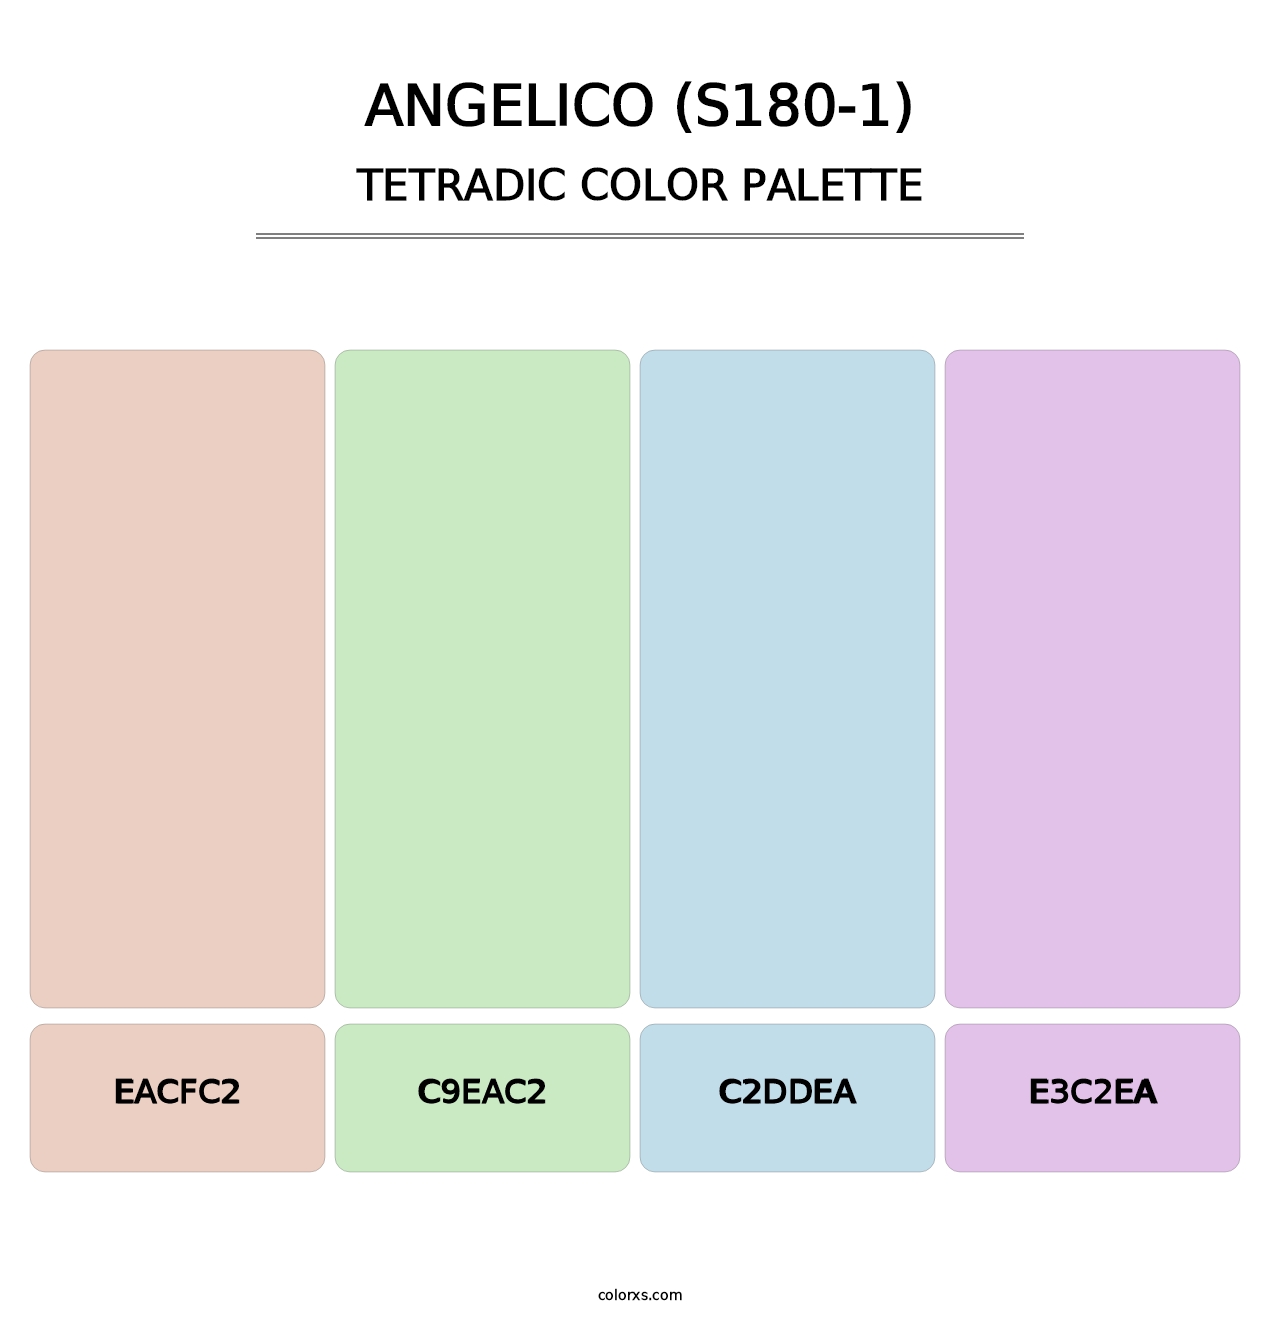 Angelico (S180-1) - Tetradic Color Palette